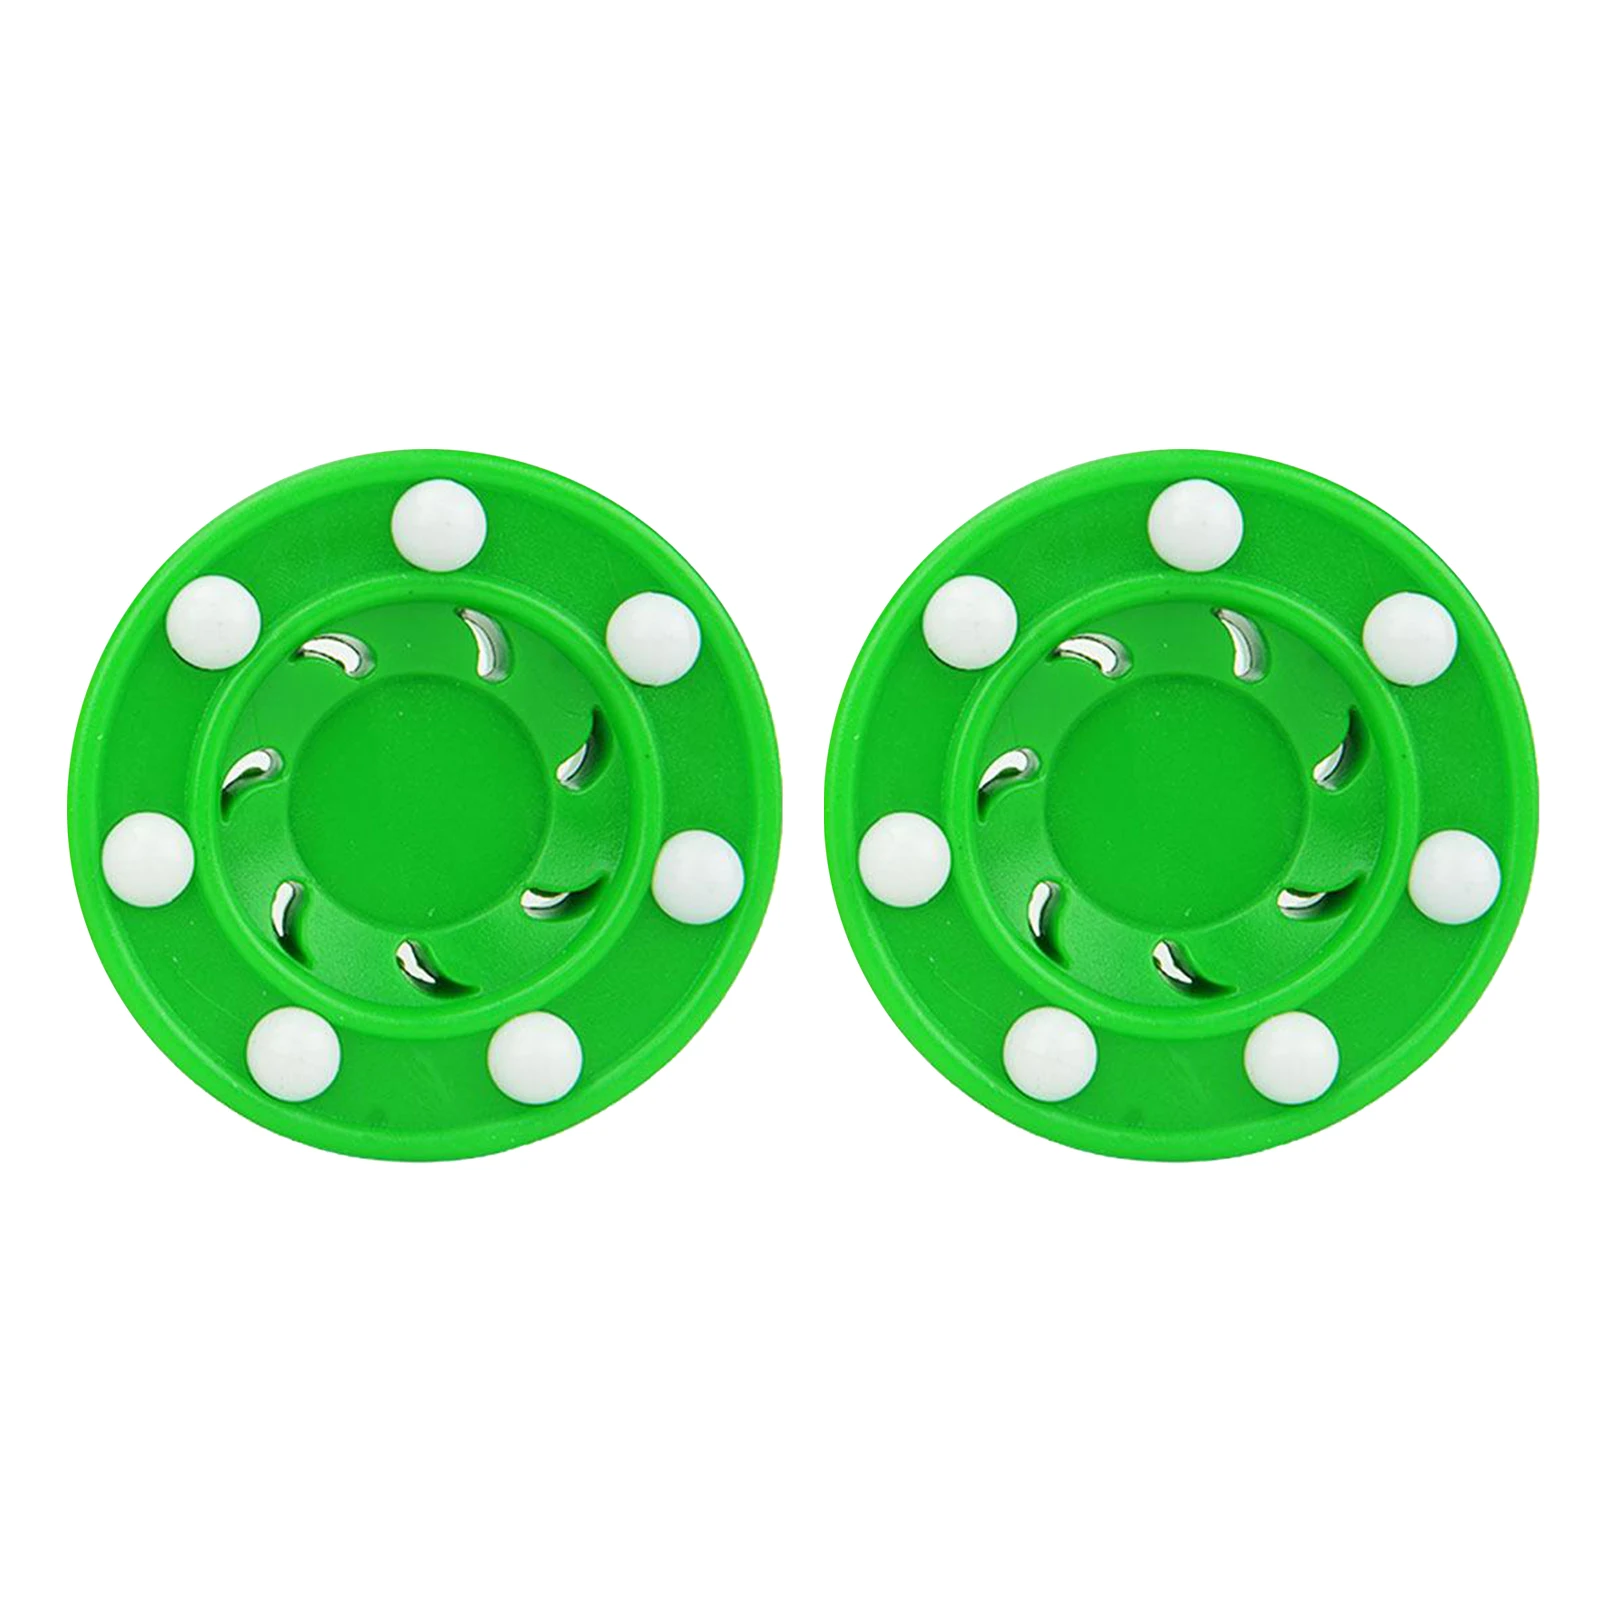 2x Sports Street Roller Hockey Game Puck Pro Shot for Practicing and Classic Training Indoor and Street Hockey Practice Puck